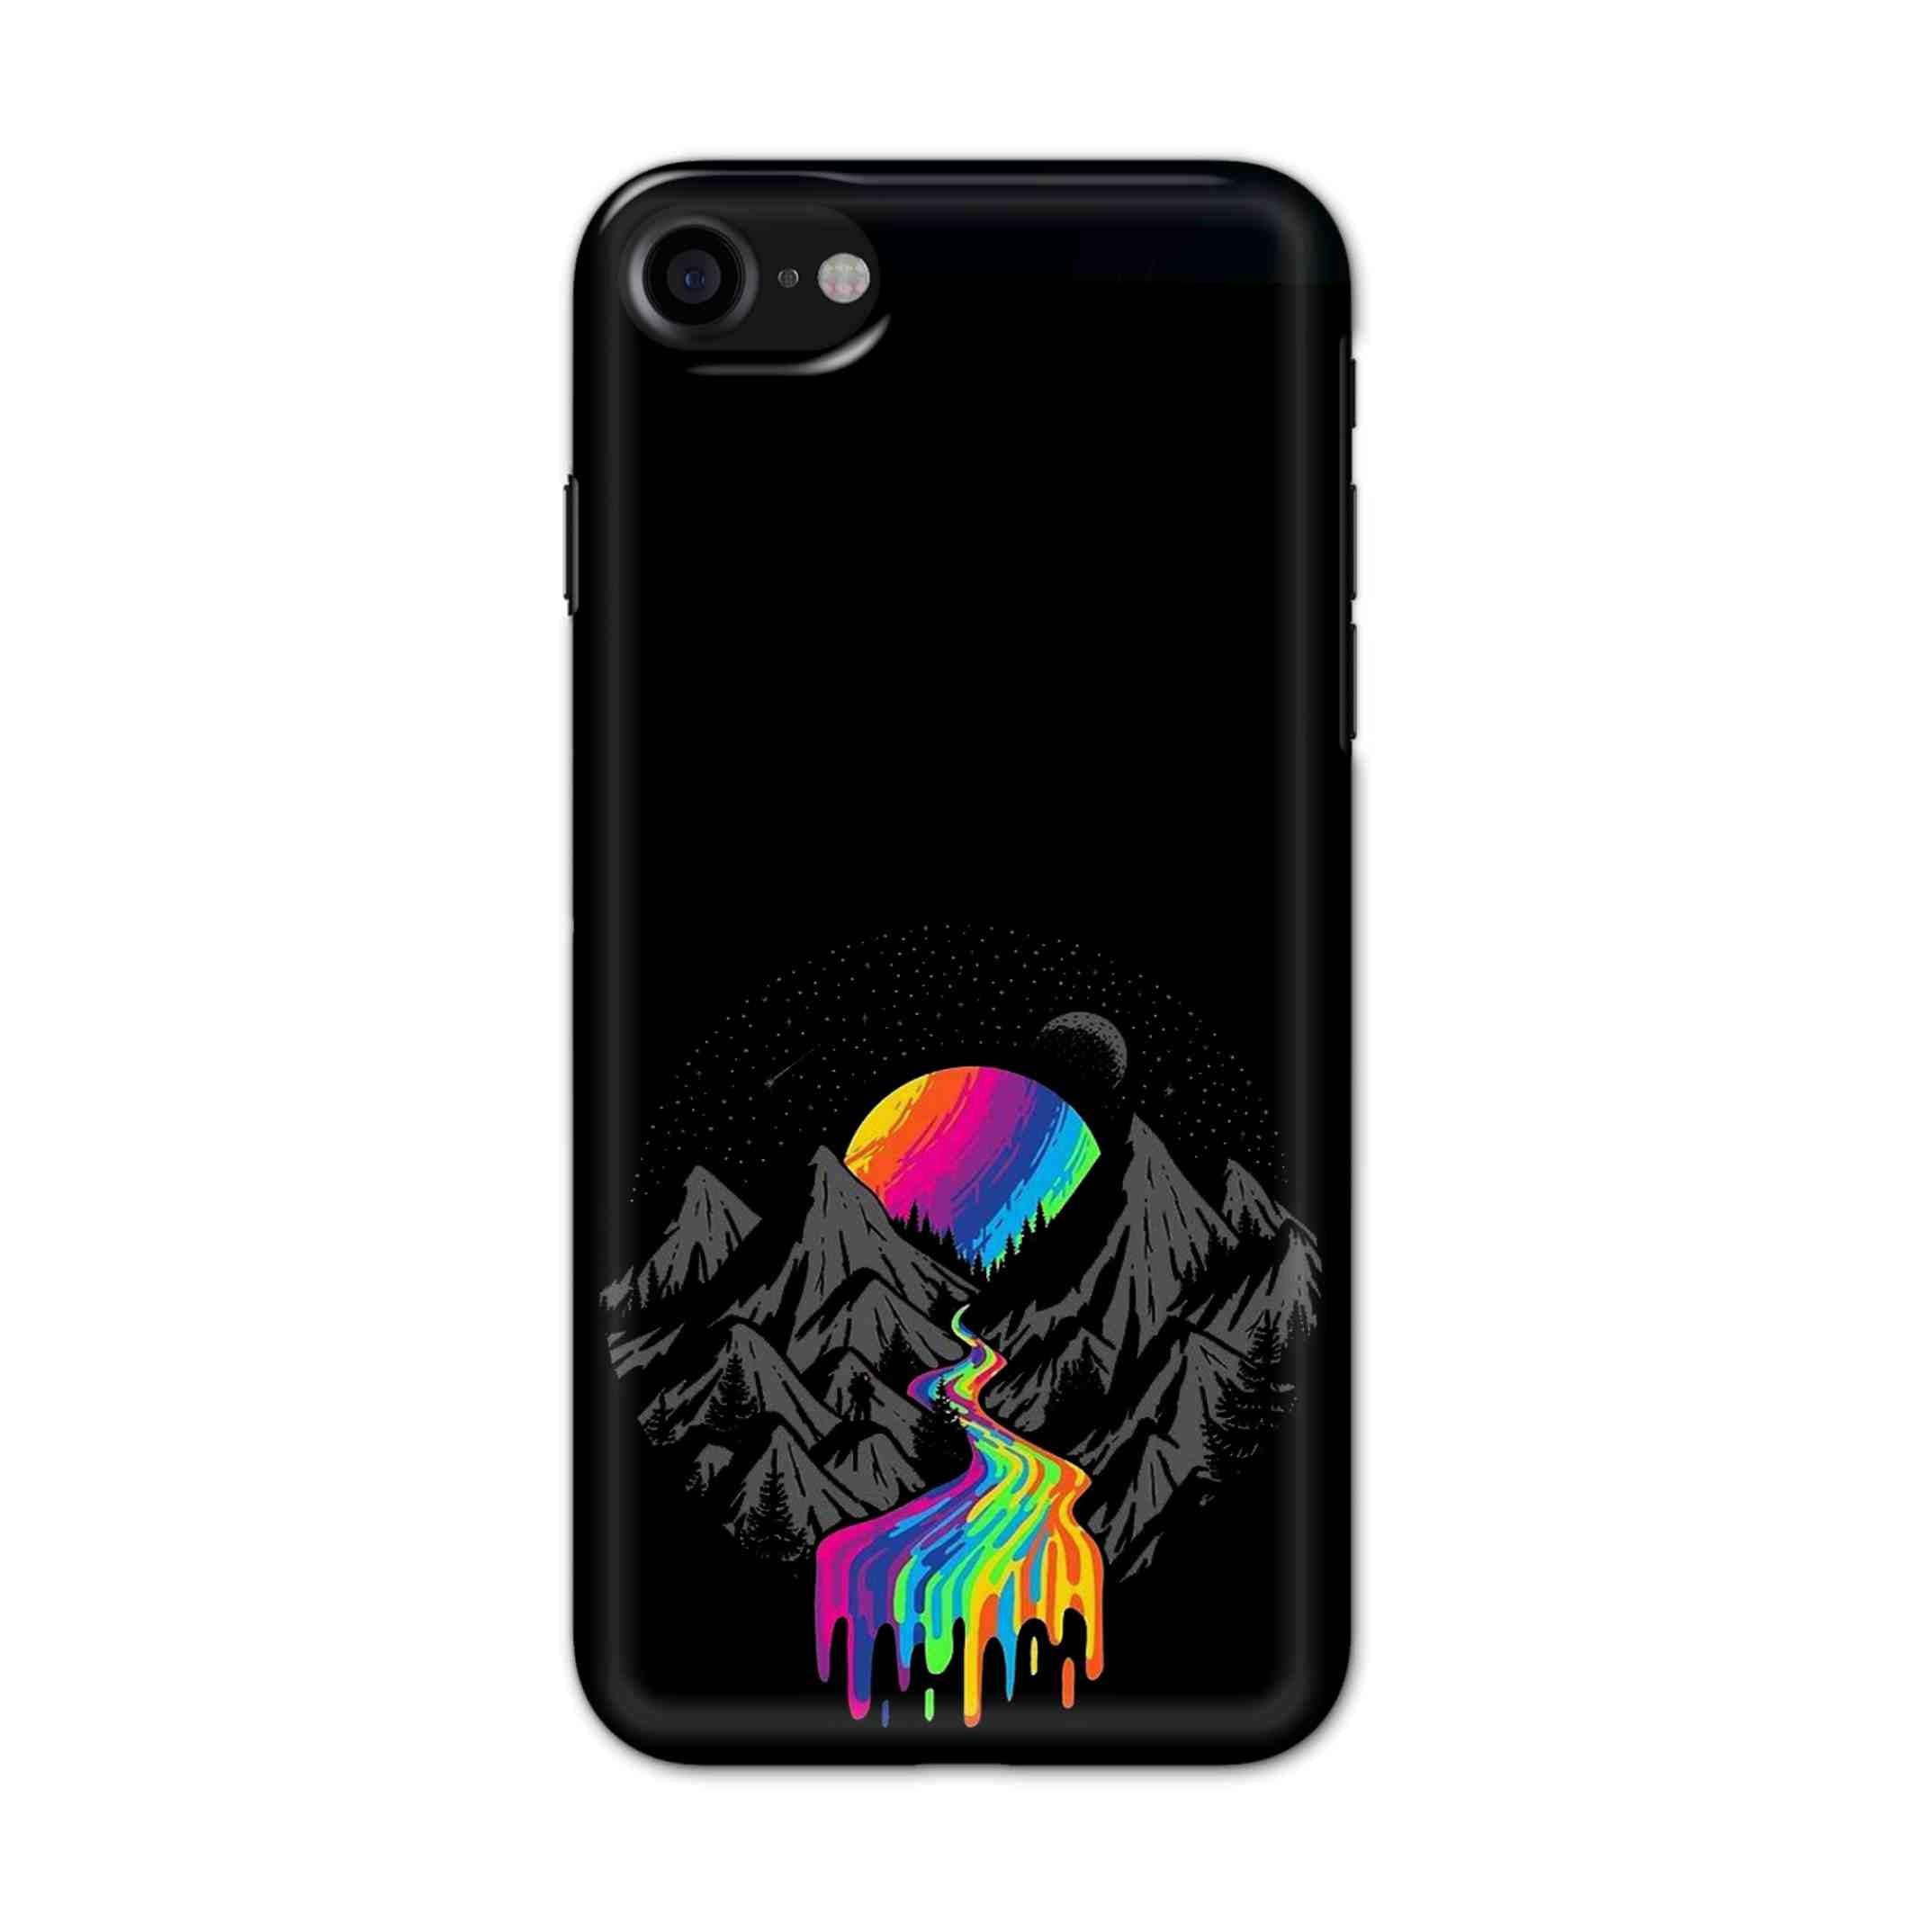 Buy Neon Mount Hard Back Mobile Phone Case/Cover For iPhone 7 / 8 Online